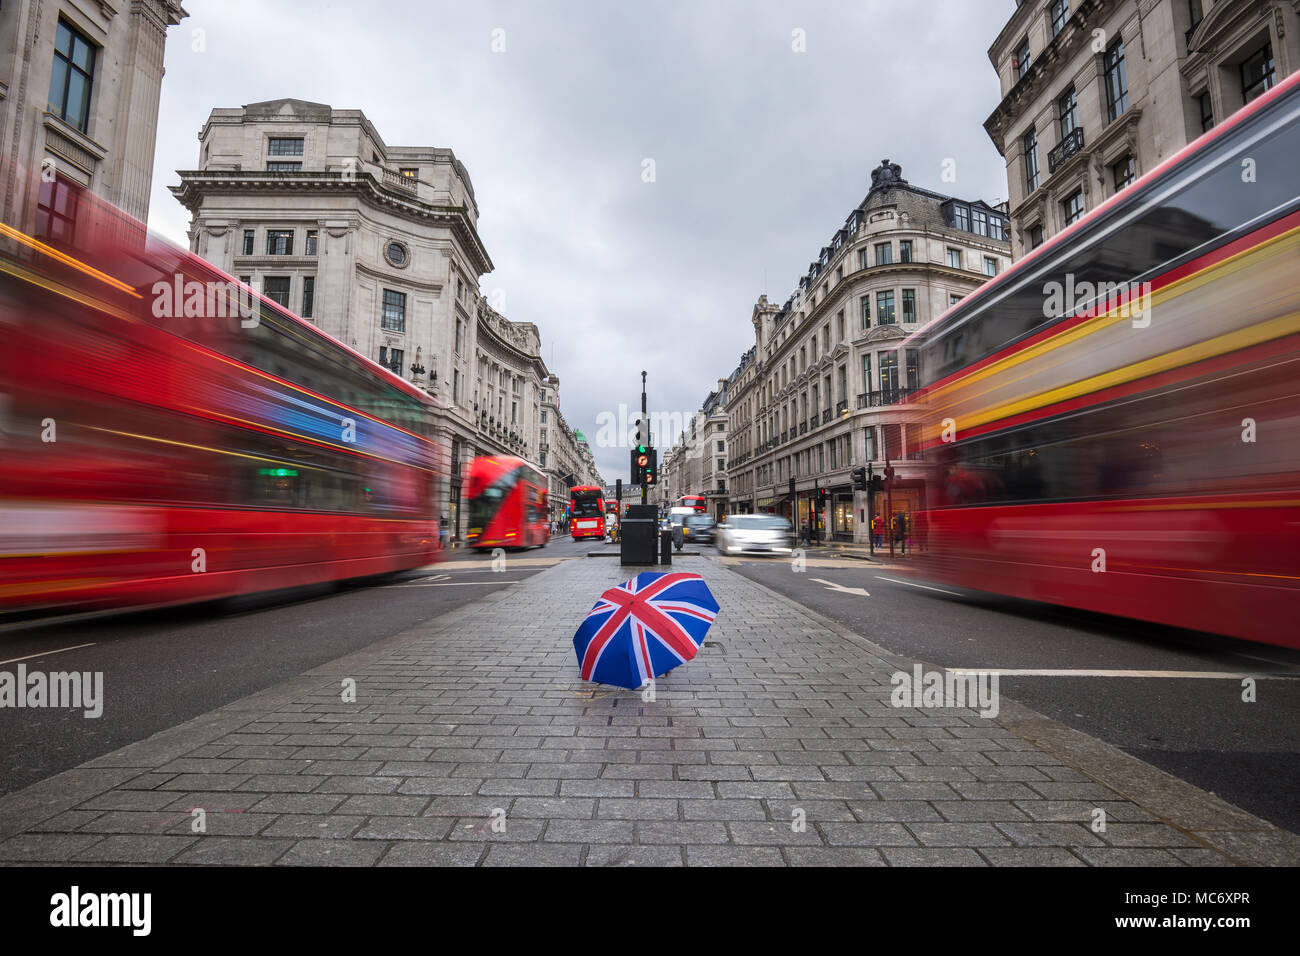 London, England - British umbrella at busy Regent Street with iconic red double-decker buses on the move Stock Photo